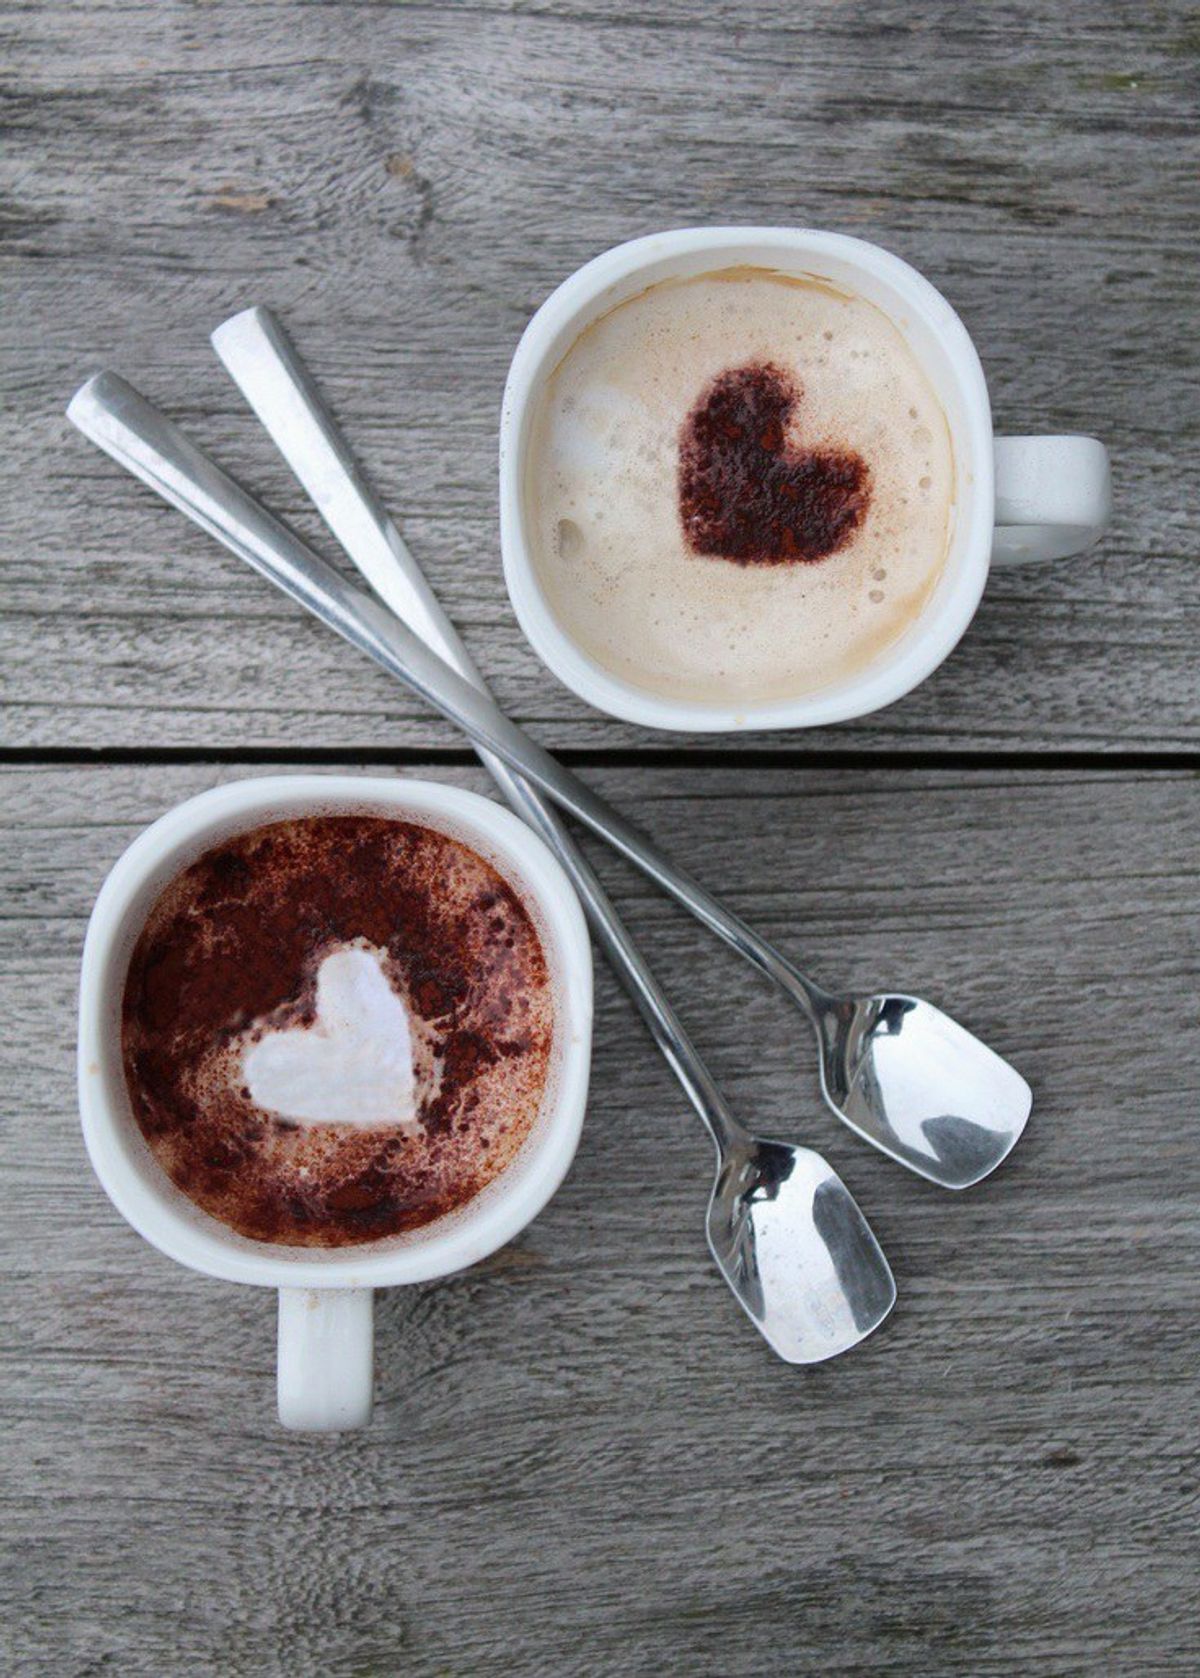 10 Reasons Why The Only Long-Term Relationship You Need Is With Coffee